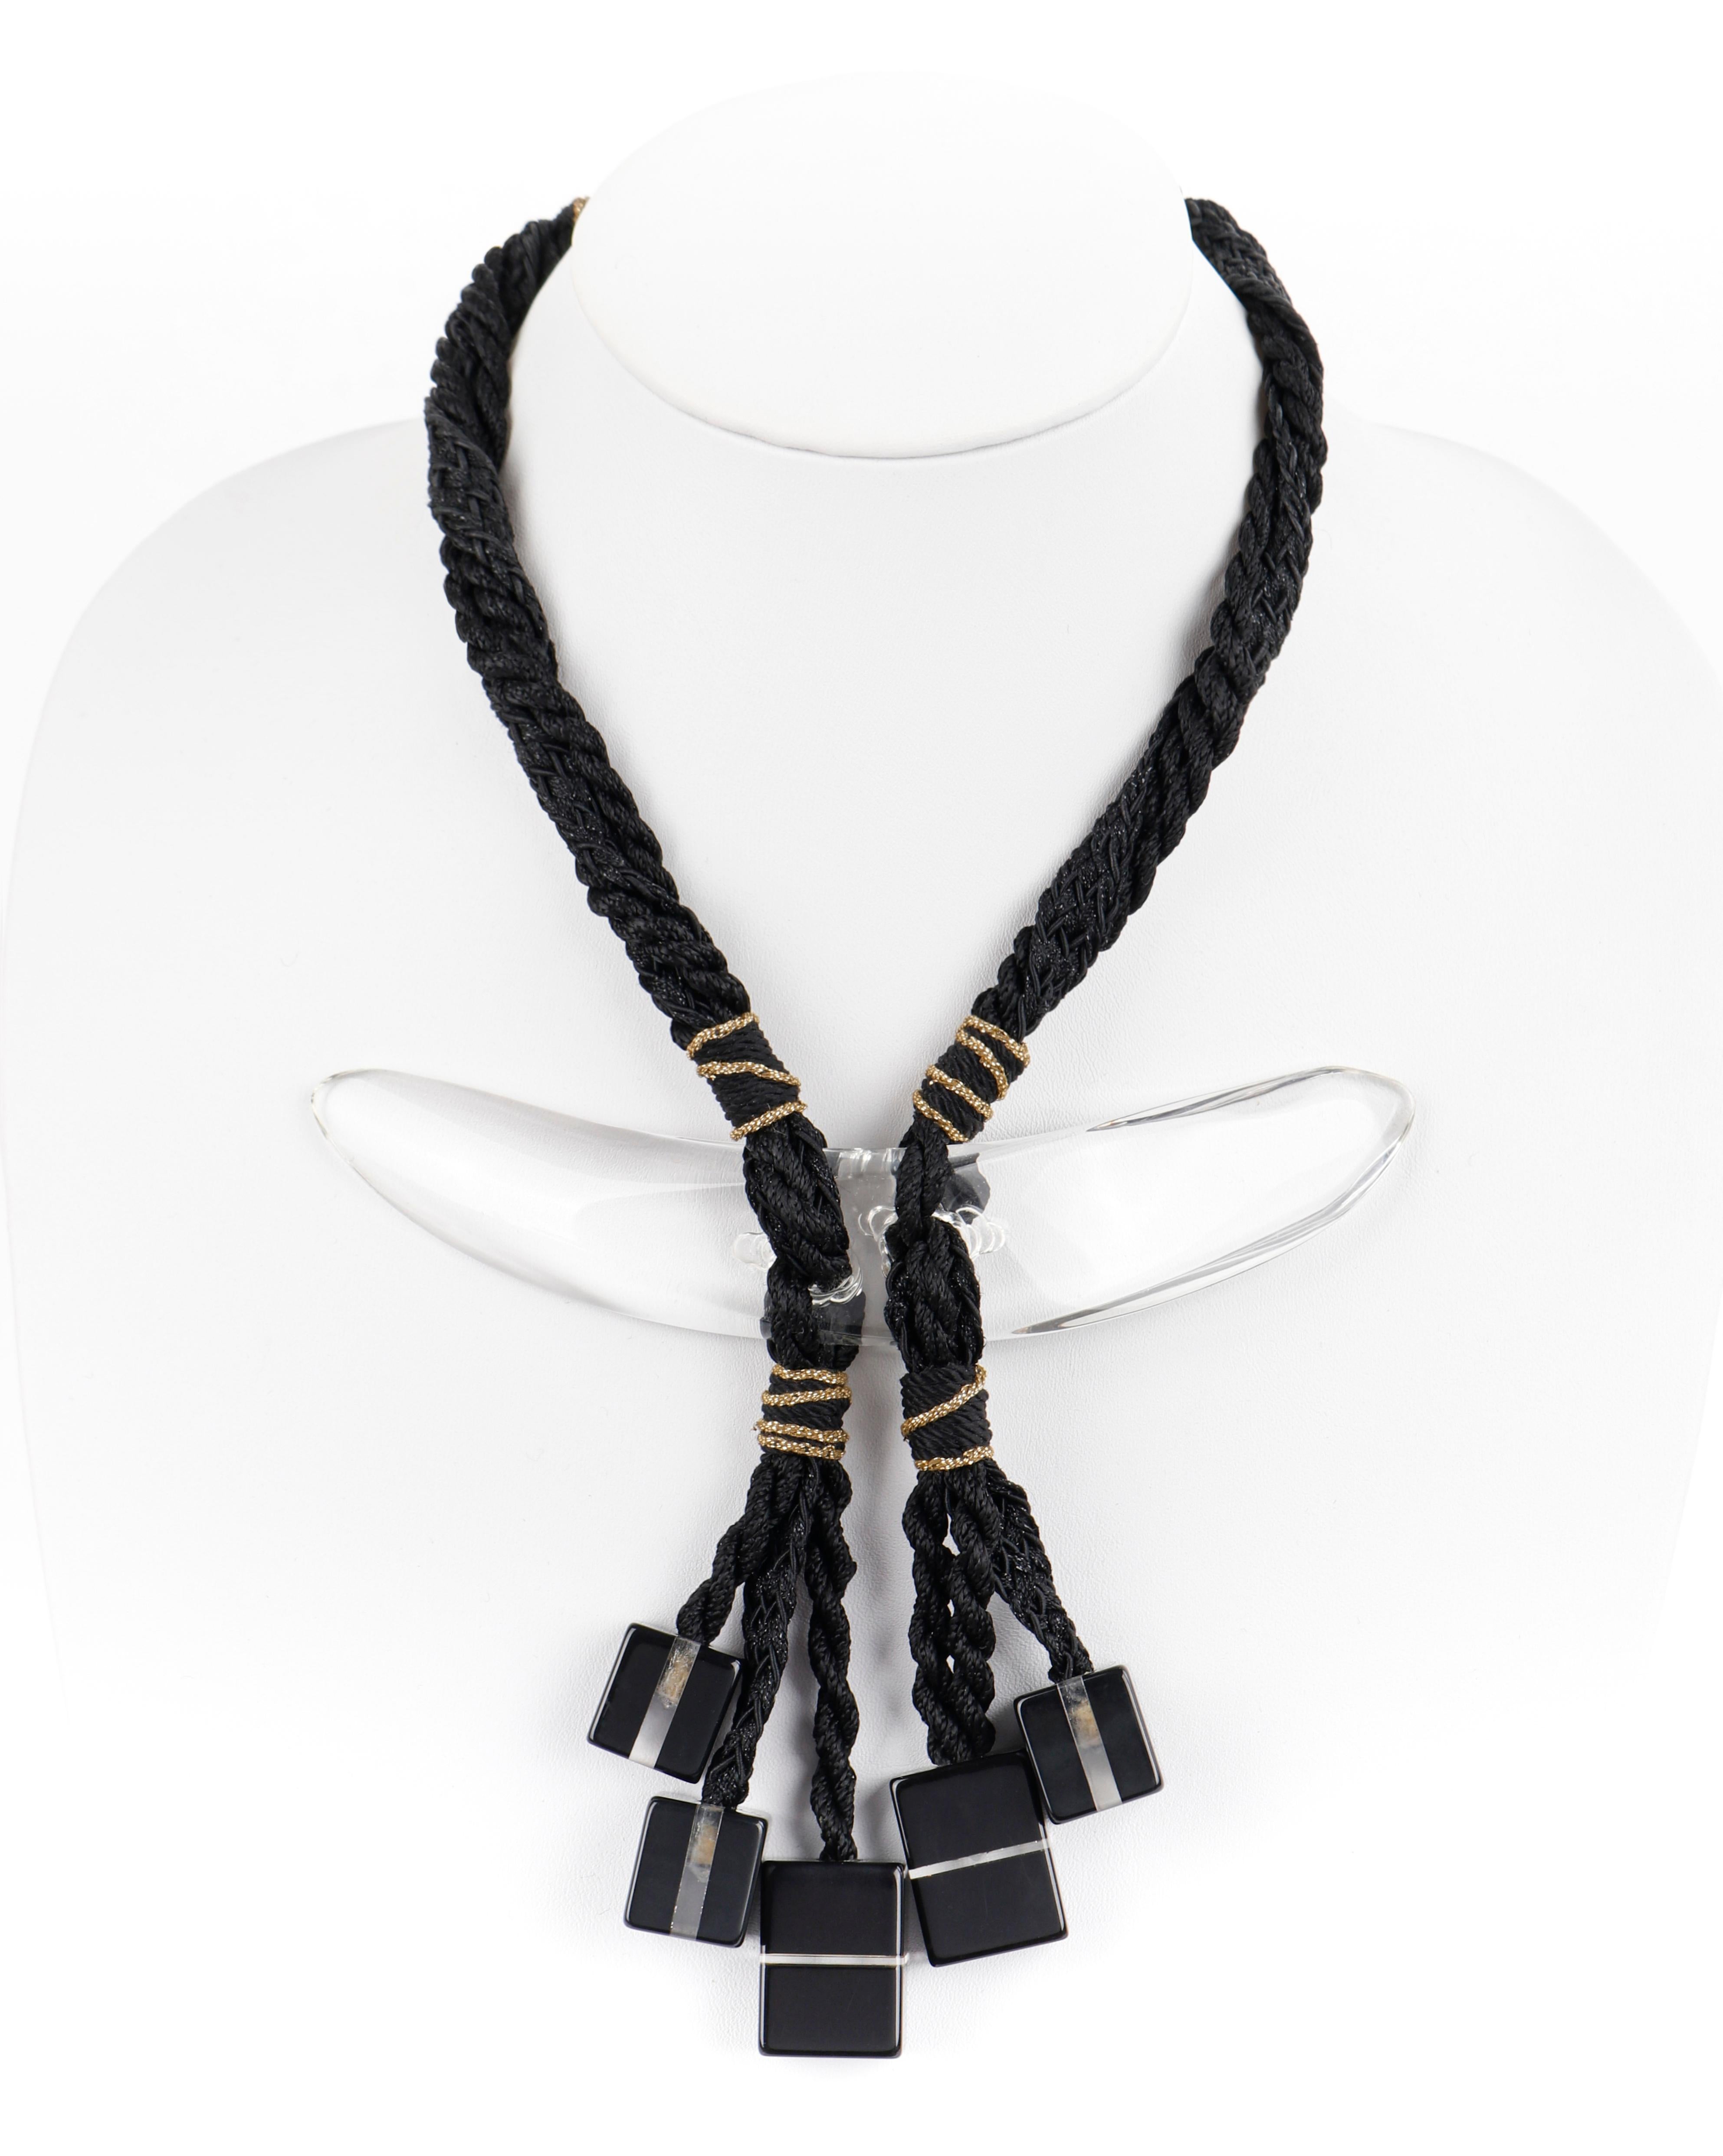 ANNE & FRANK VIGNERI c.1981 Black Clear Lucite Block Rope Necklace Numbered

Brand / Manufacturer: Anne & Frank Vigneri
Circa: 1981
Style: Rope necklace
Color(s): Shades of black and gold (rope); black, clear (lucite)
Unmarked Material (feel of):